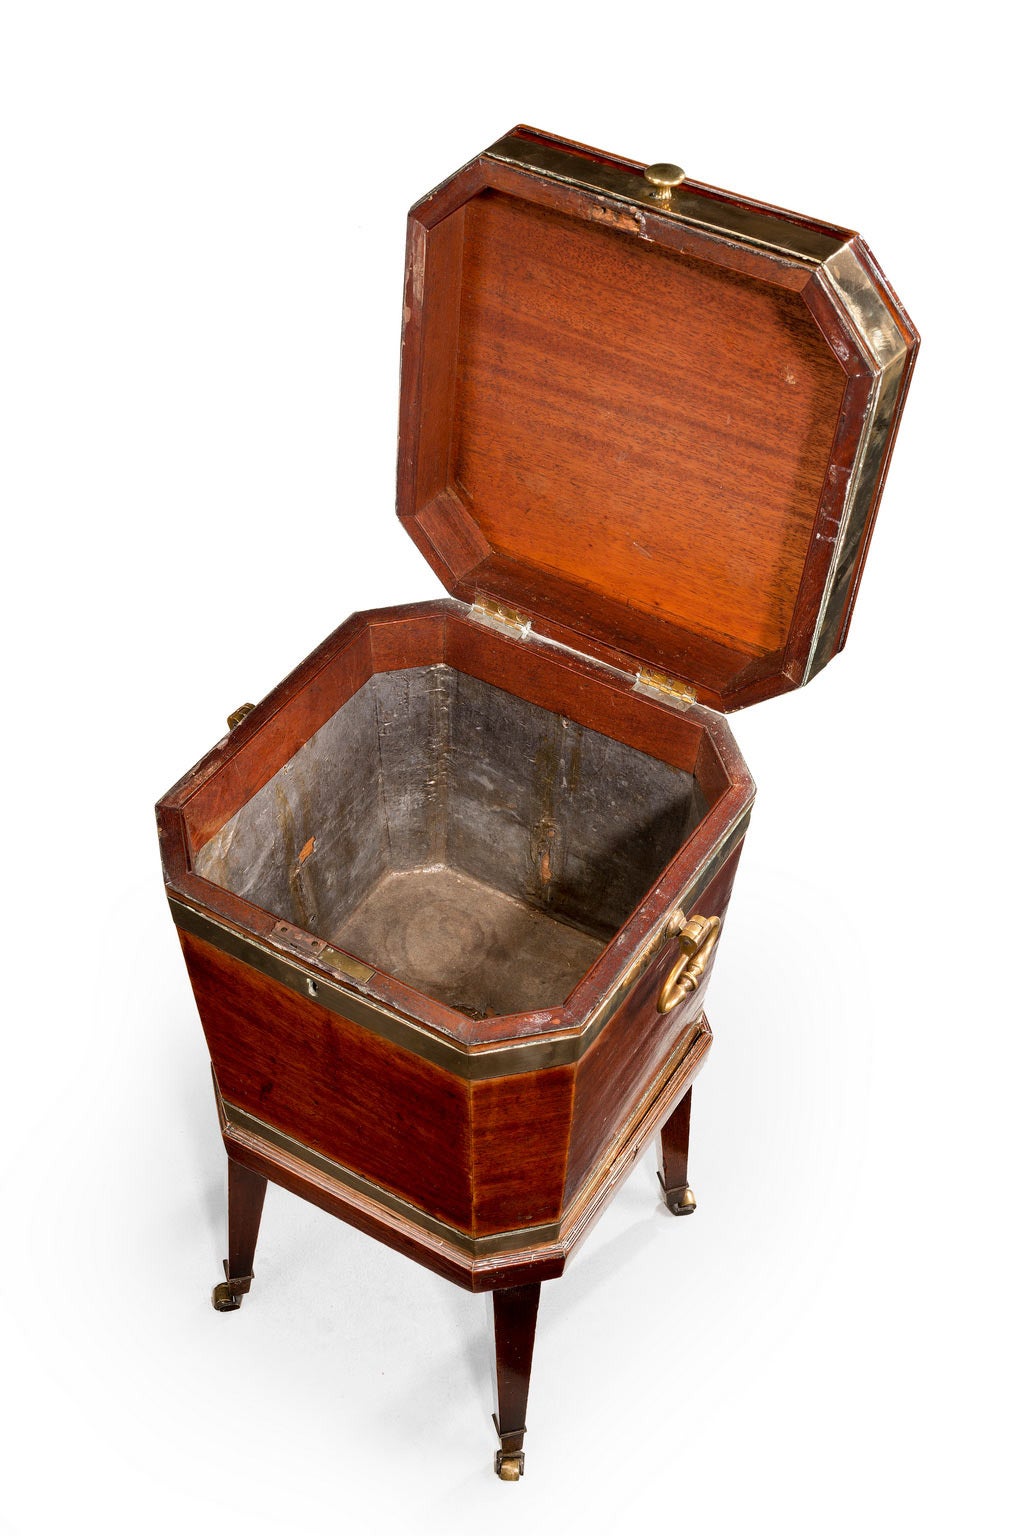 George III period mahogany square cellaret with cantered corners. With very good color and patina, retaining the original hammer lid lining. Brass bindings and massive drop handles. Tapering supports terminating in brass shoes and casters.